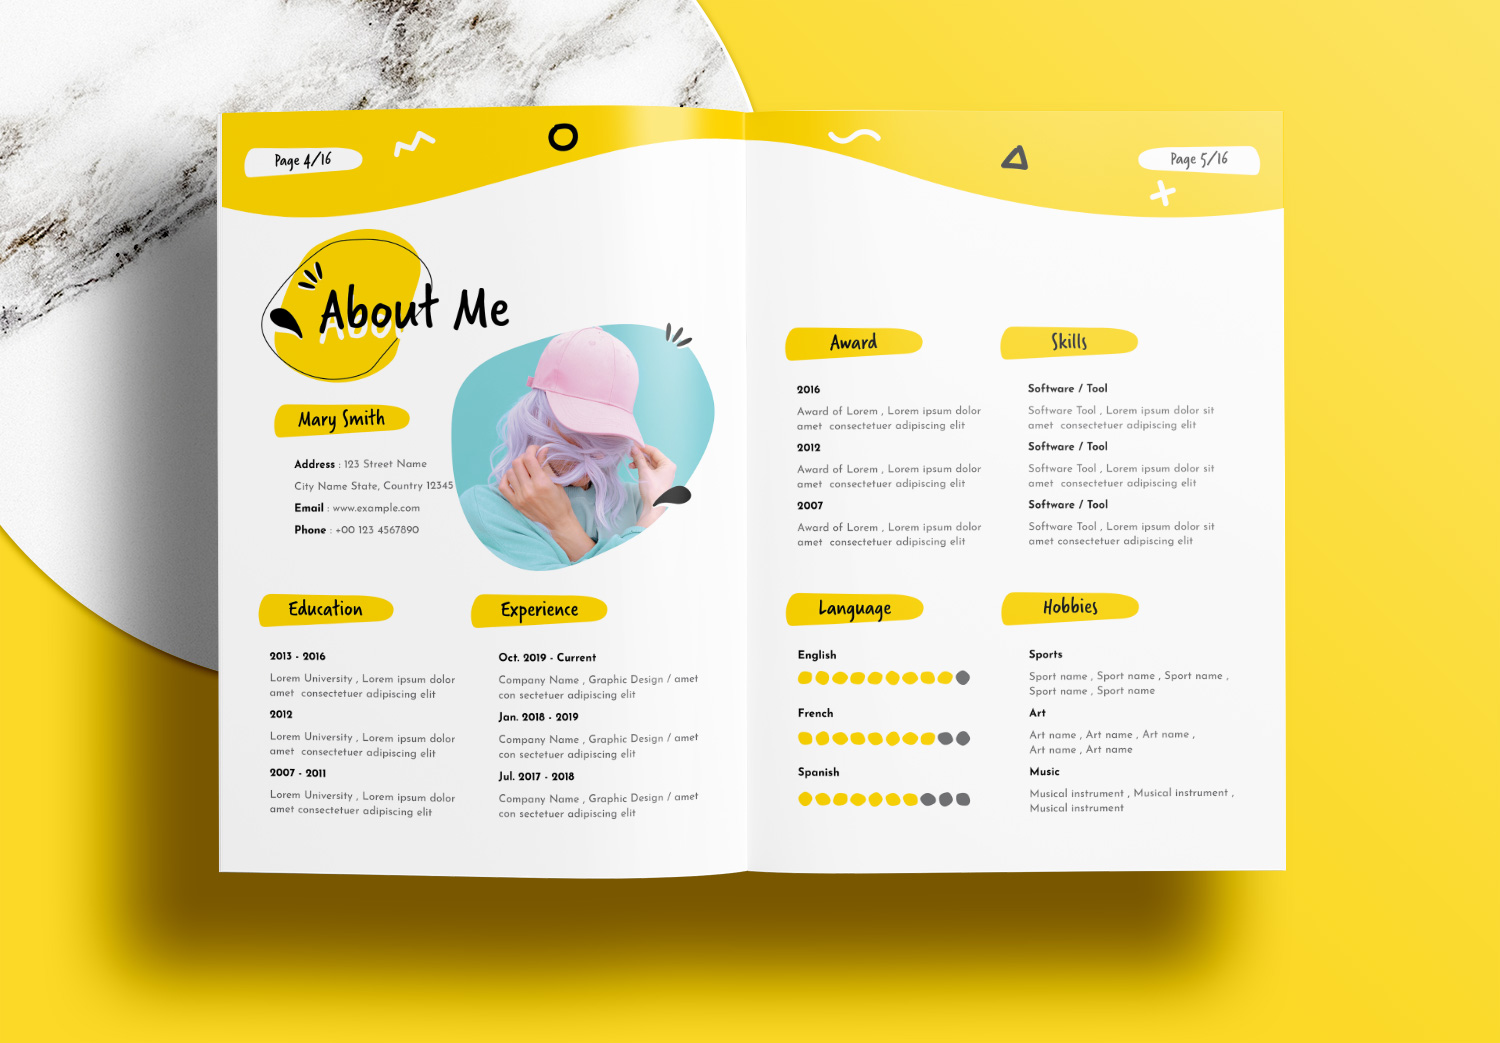 Free InDesign Portfolio Templates with Yellow Accents